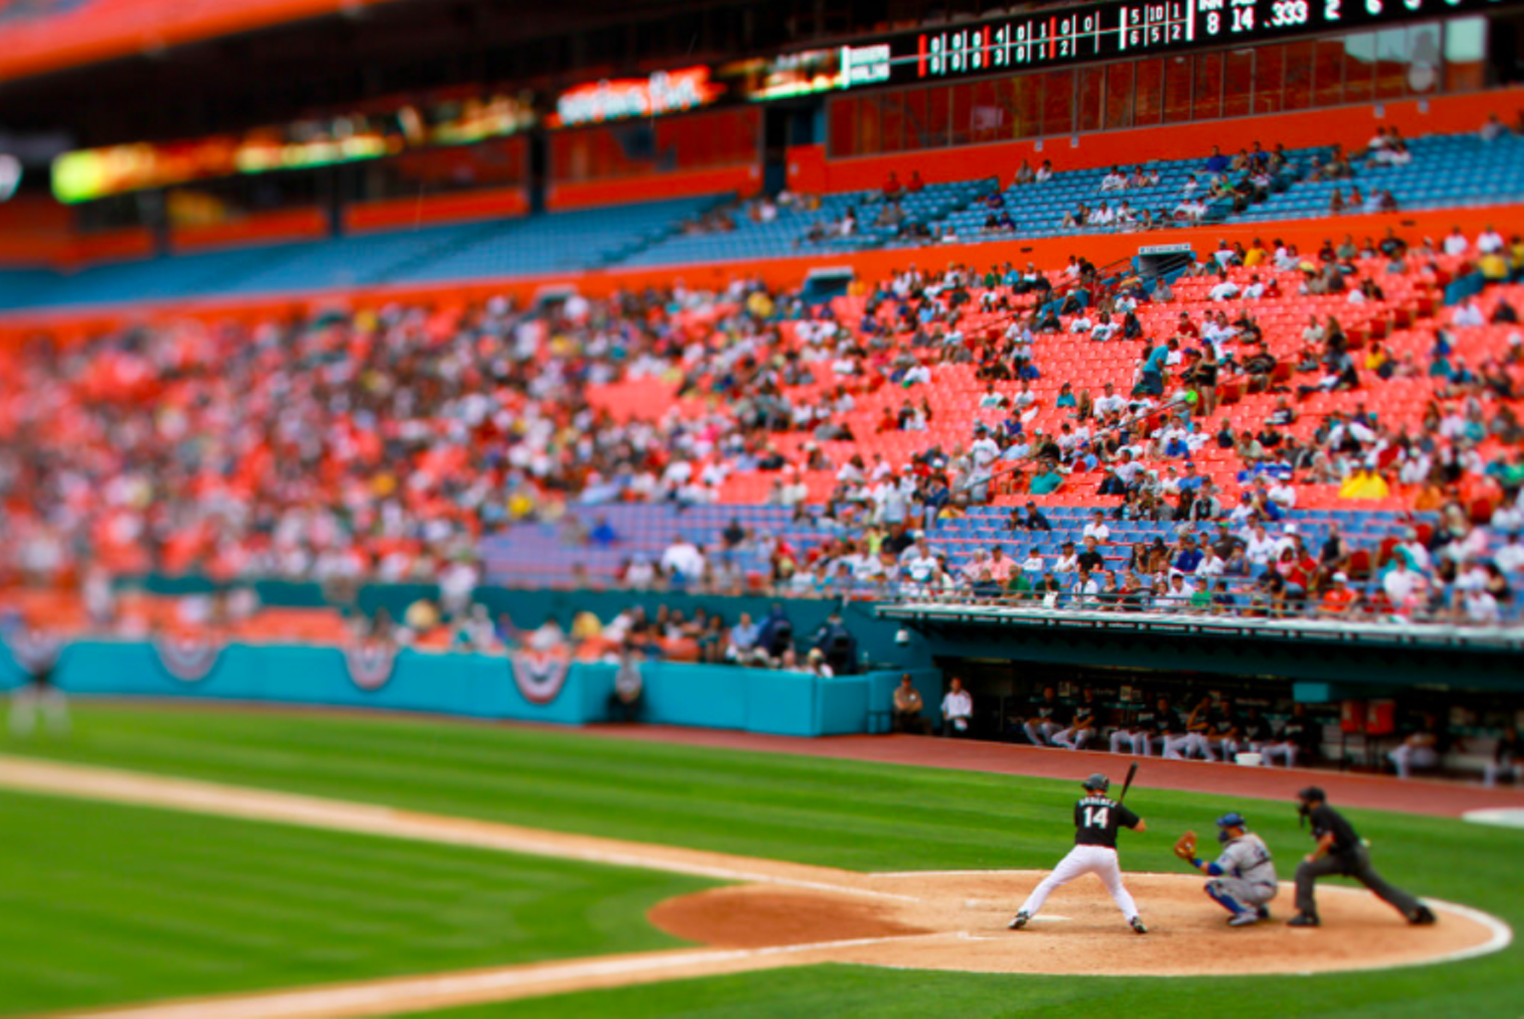 Marlins fans have only one complaint about '90s teal throwbacks